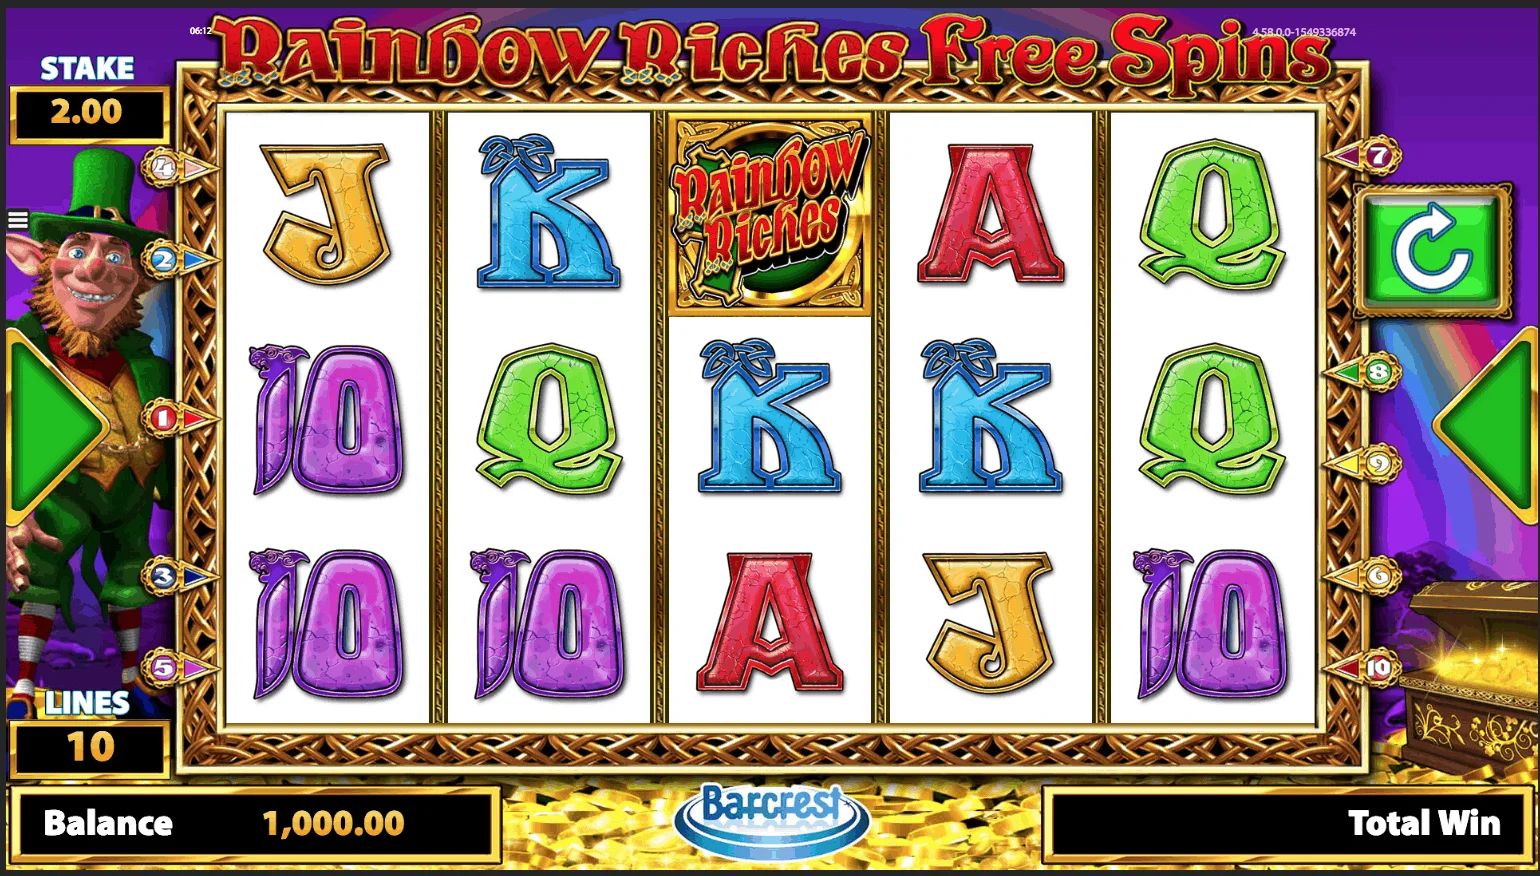 Rainbow Riches not on Gamstop image